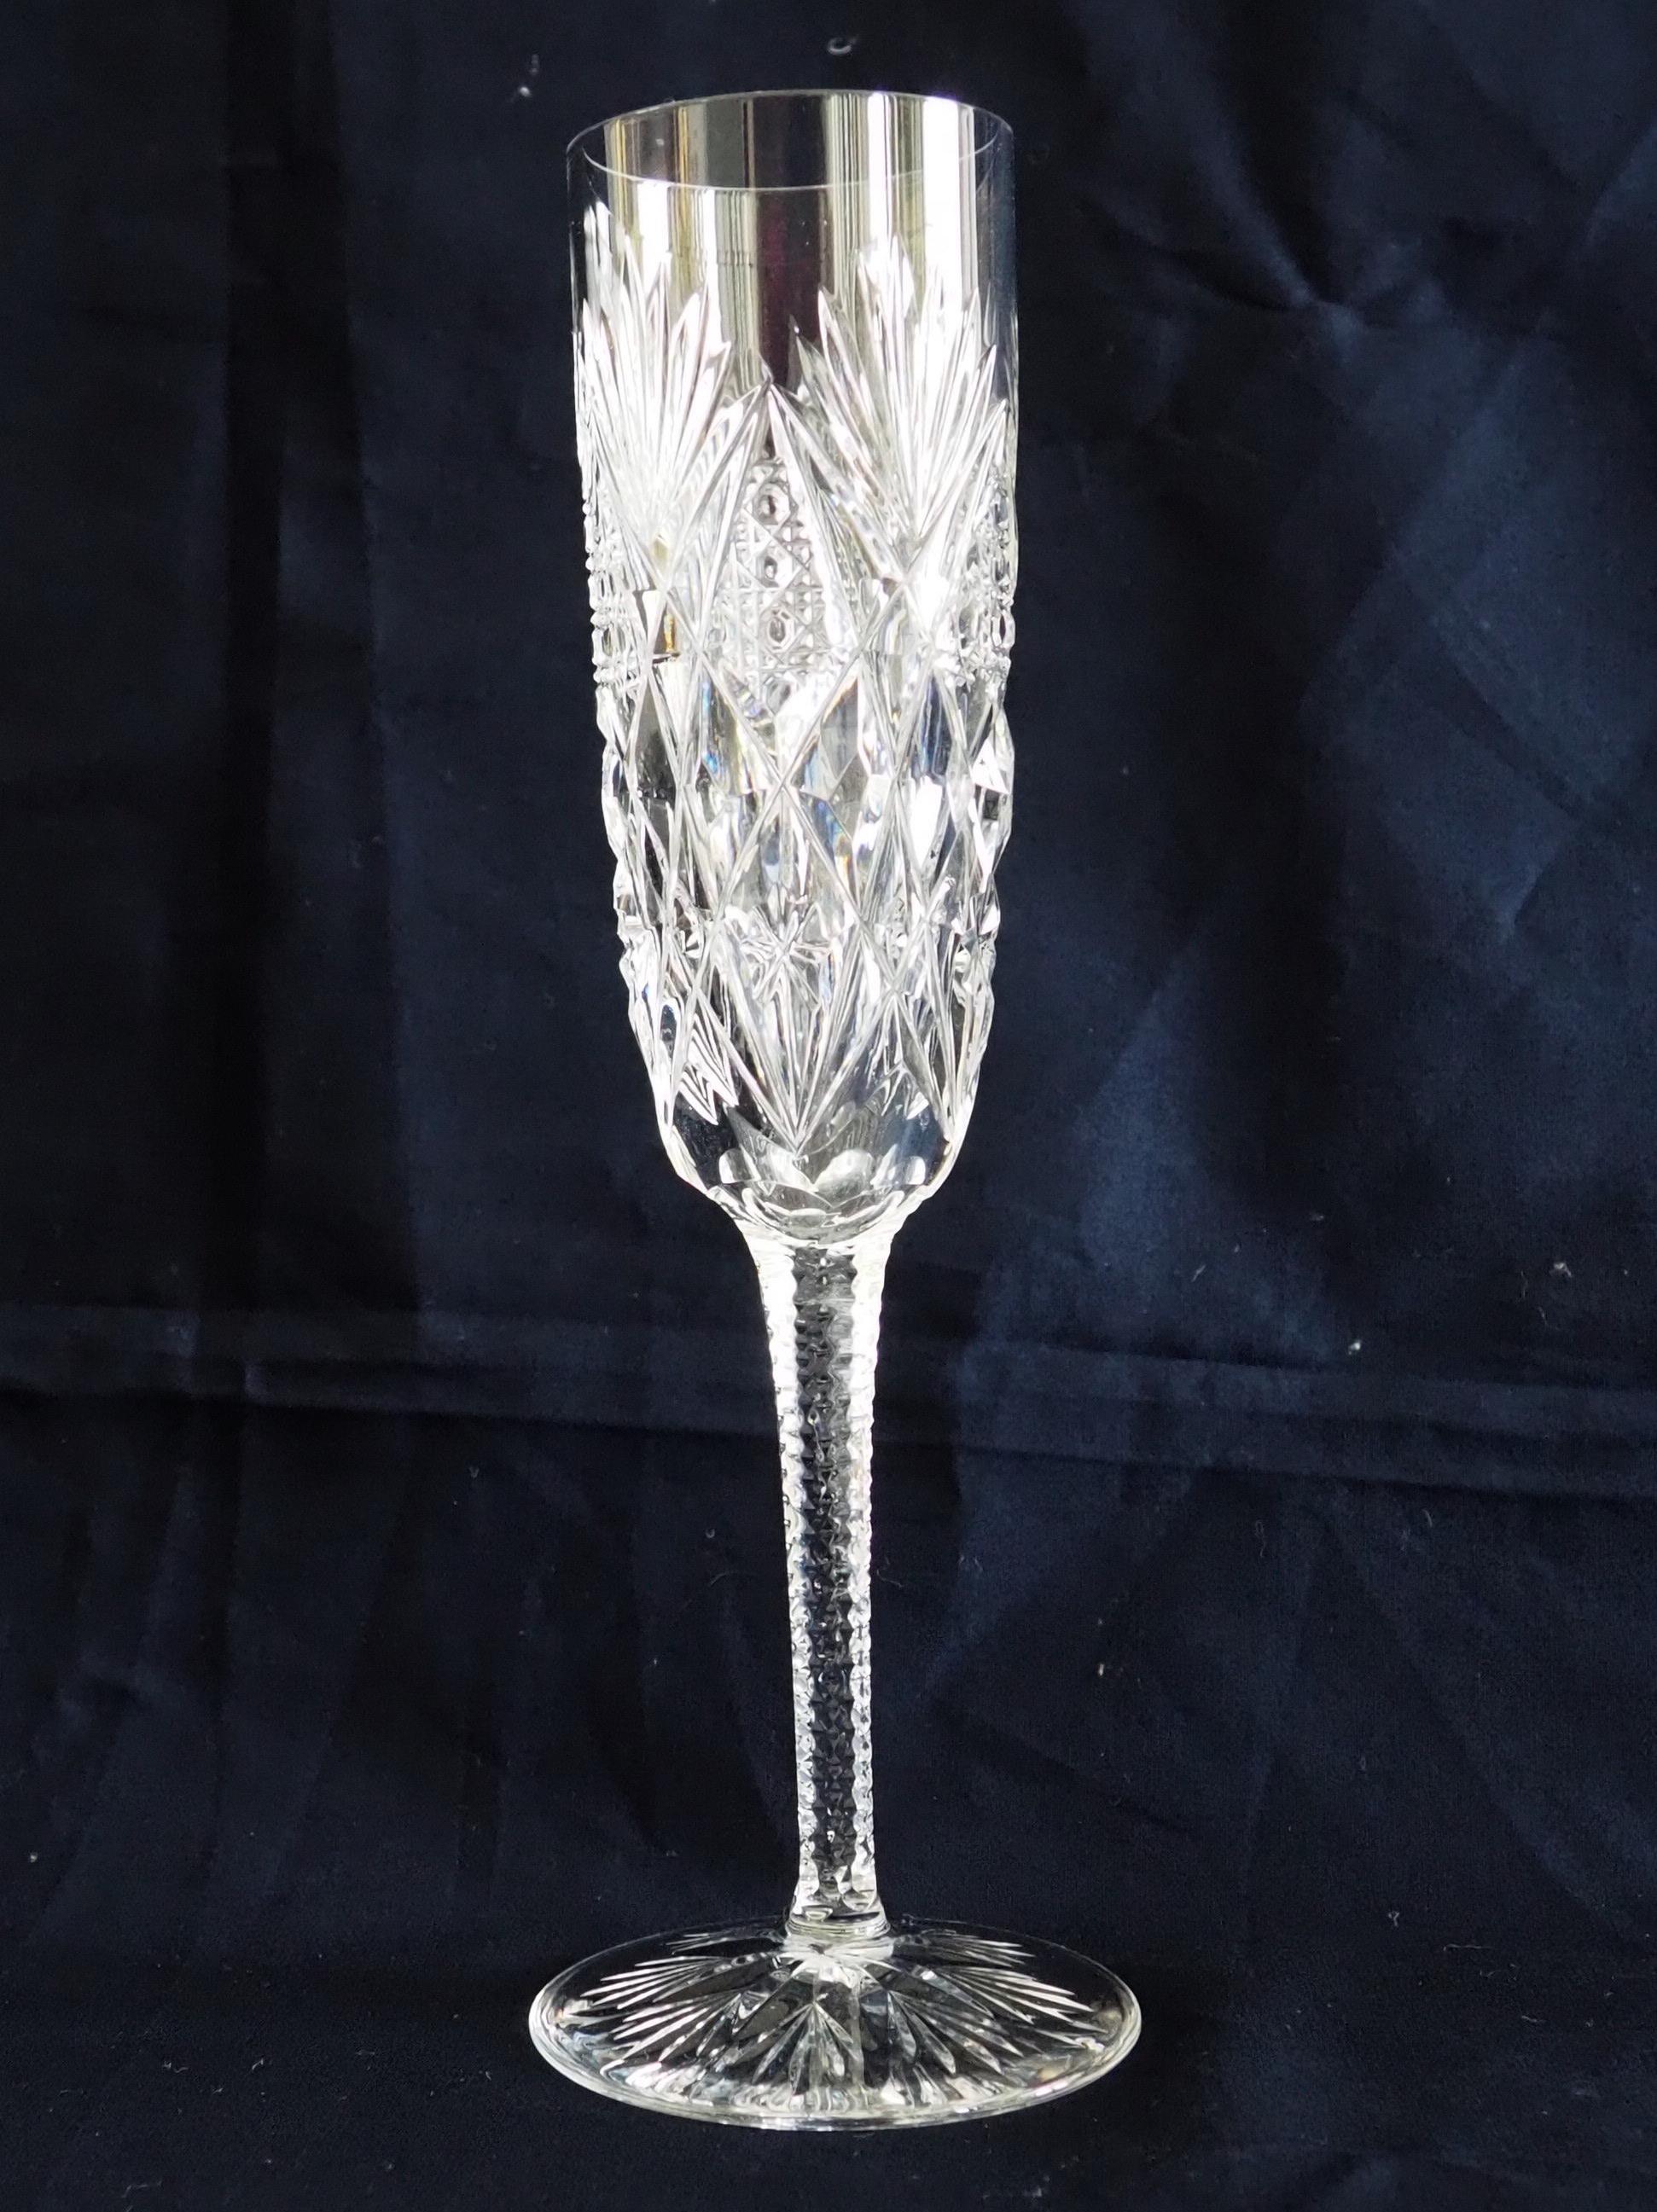 Set of 24 St Louis crystal glasses (6*4), Florence pattern - signed - 6 guests 7